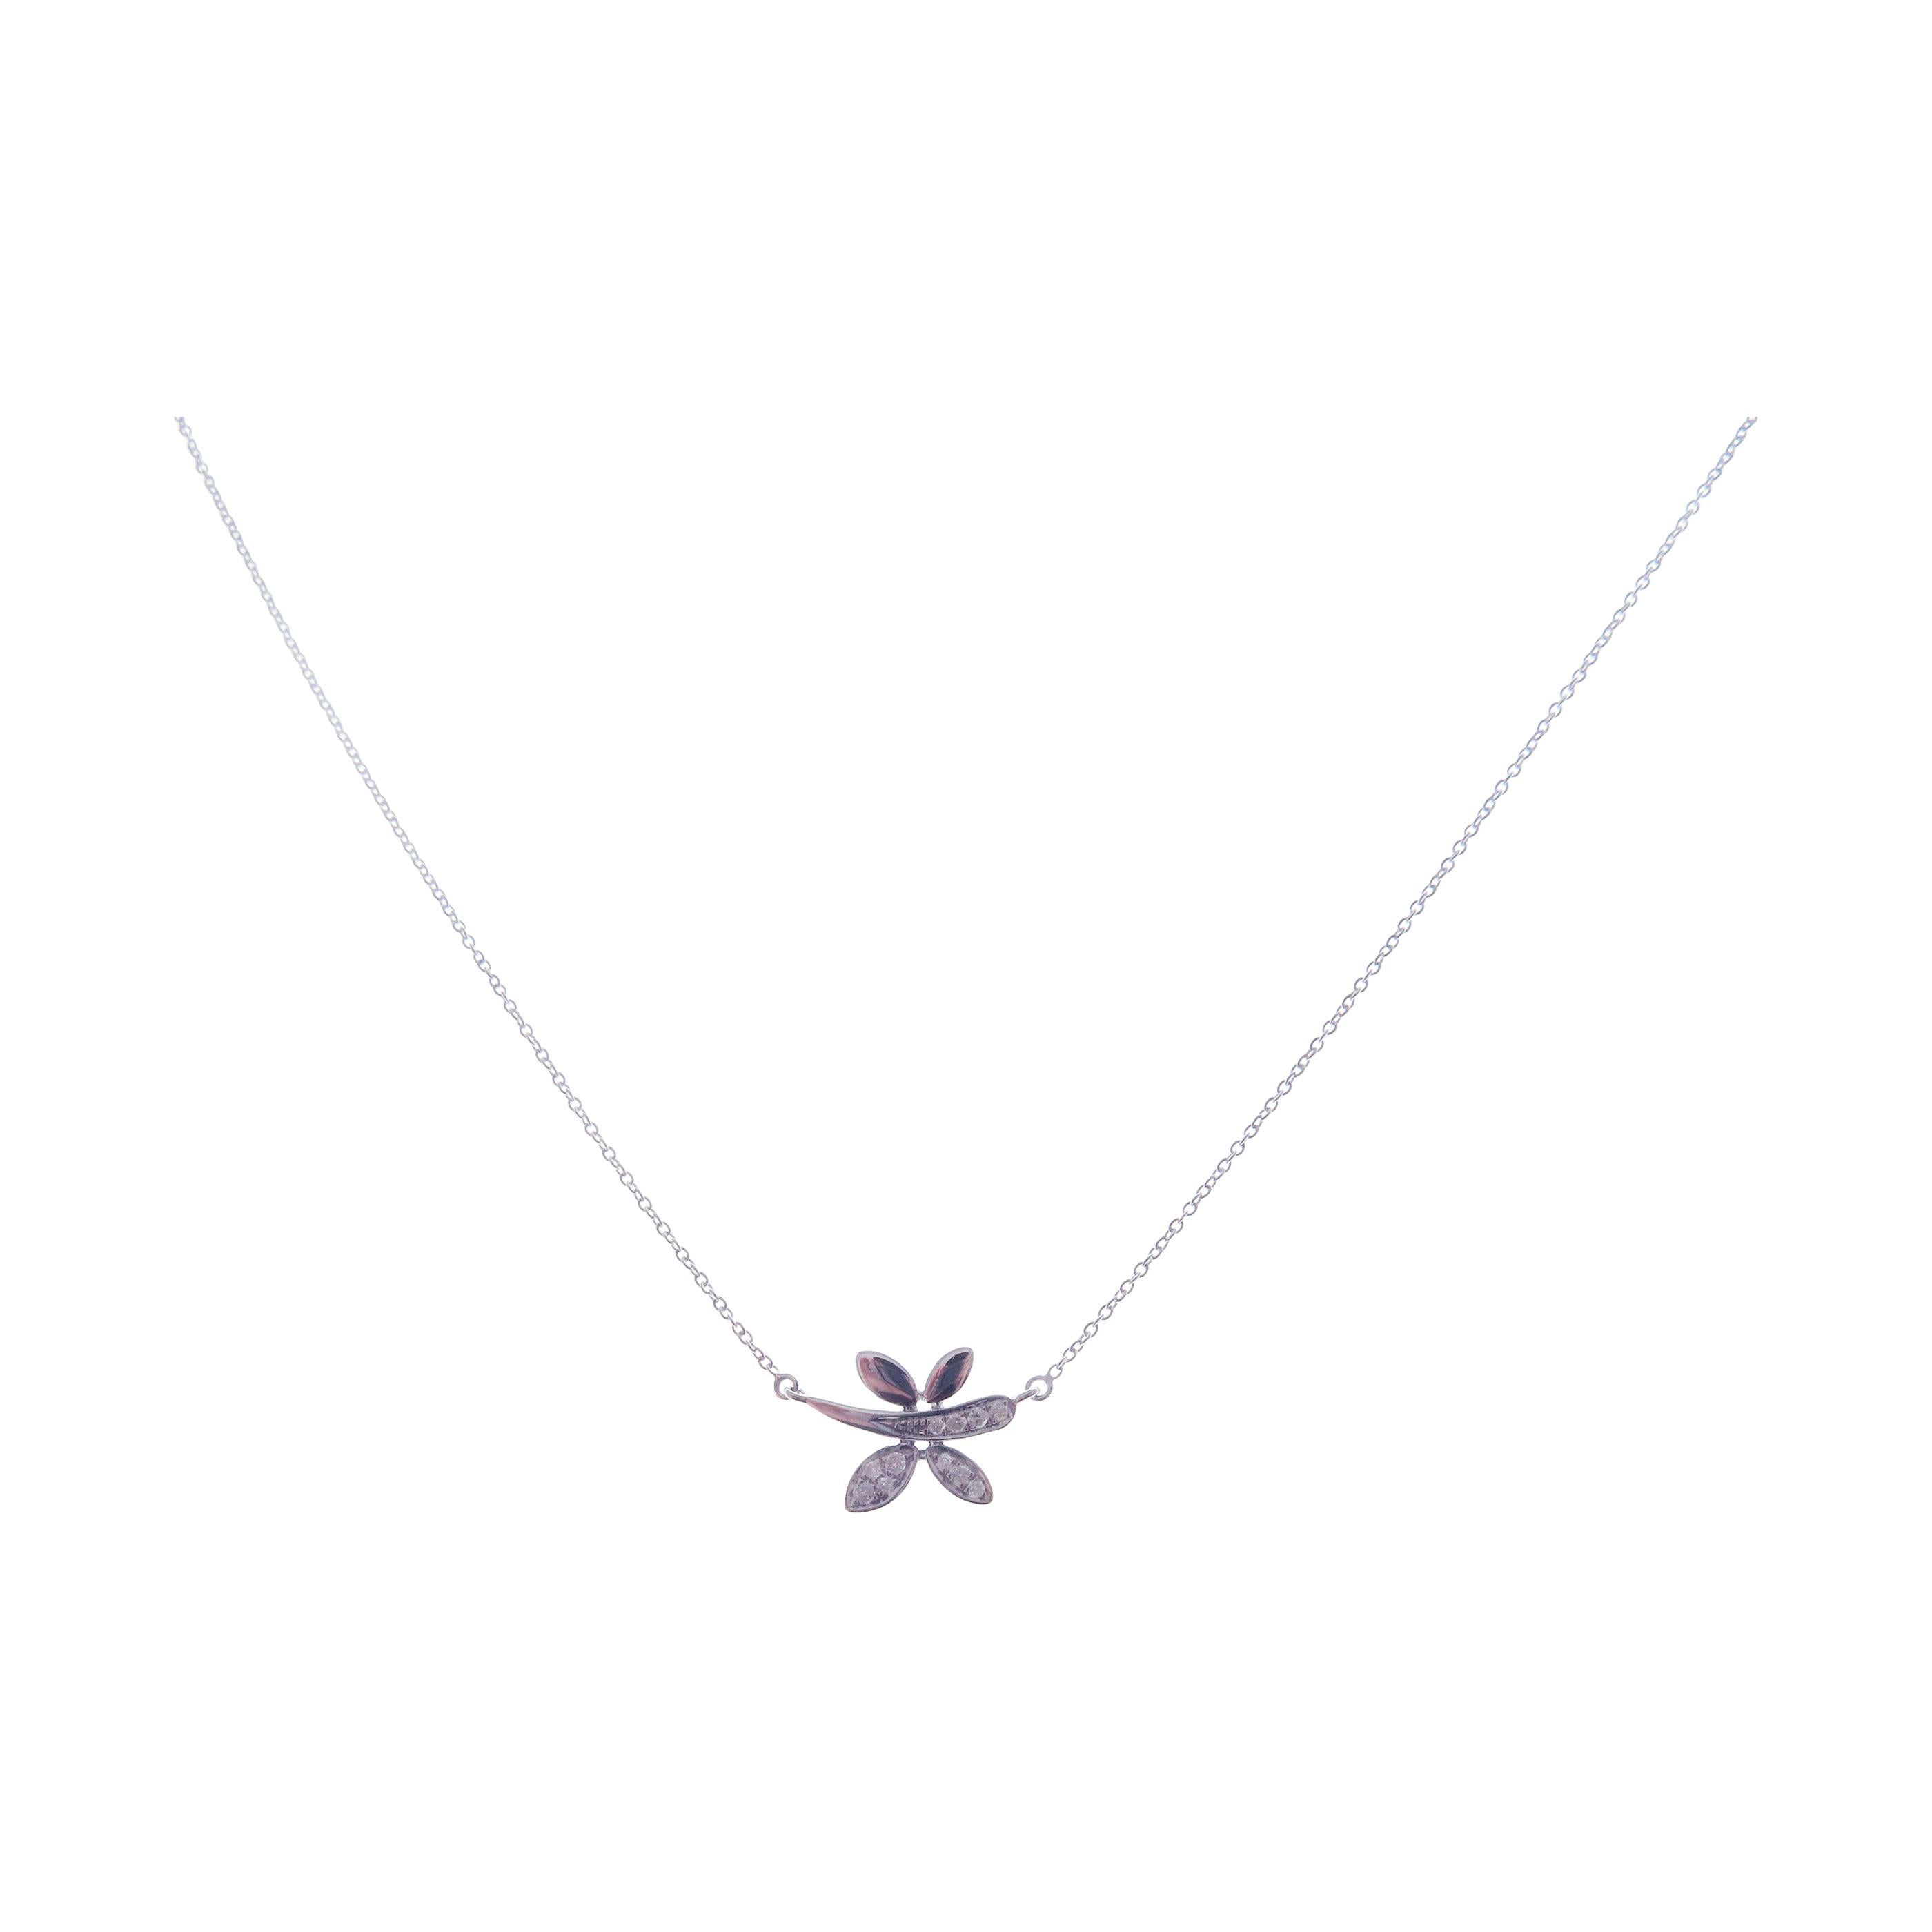 This small dragonfly necklace is crafted in 18-karat white gold, weighing approximately 0.06 total carats of SI-H Quality white diamond. 

Necklace is 16